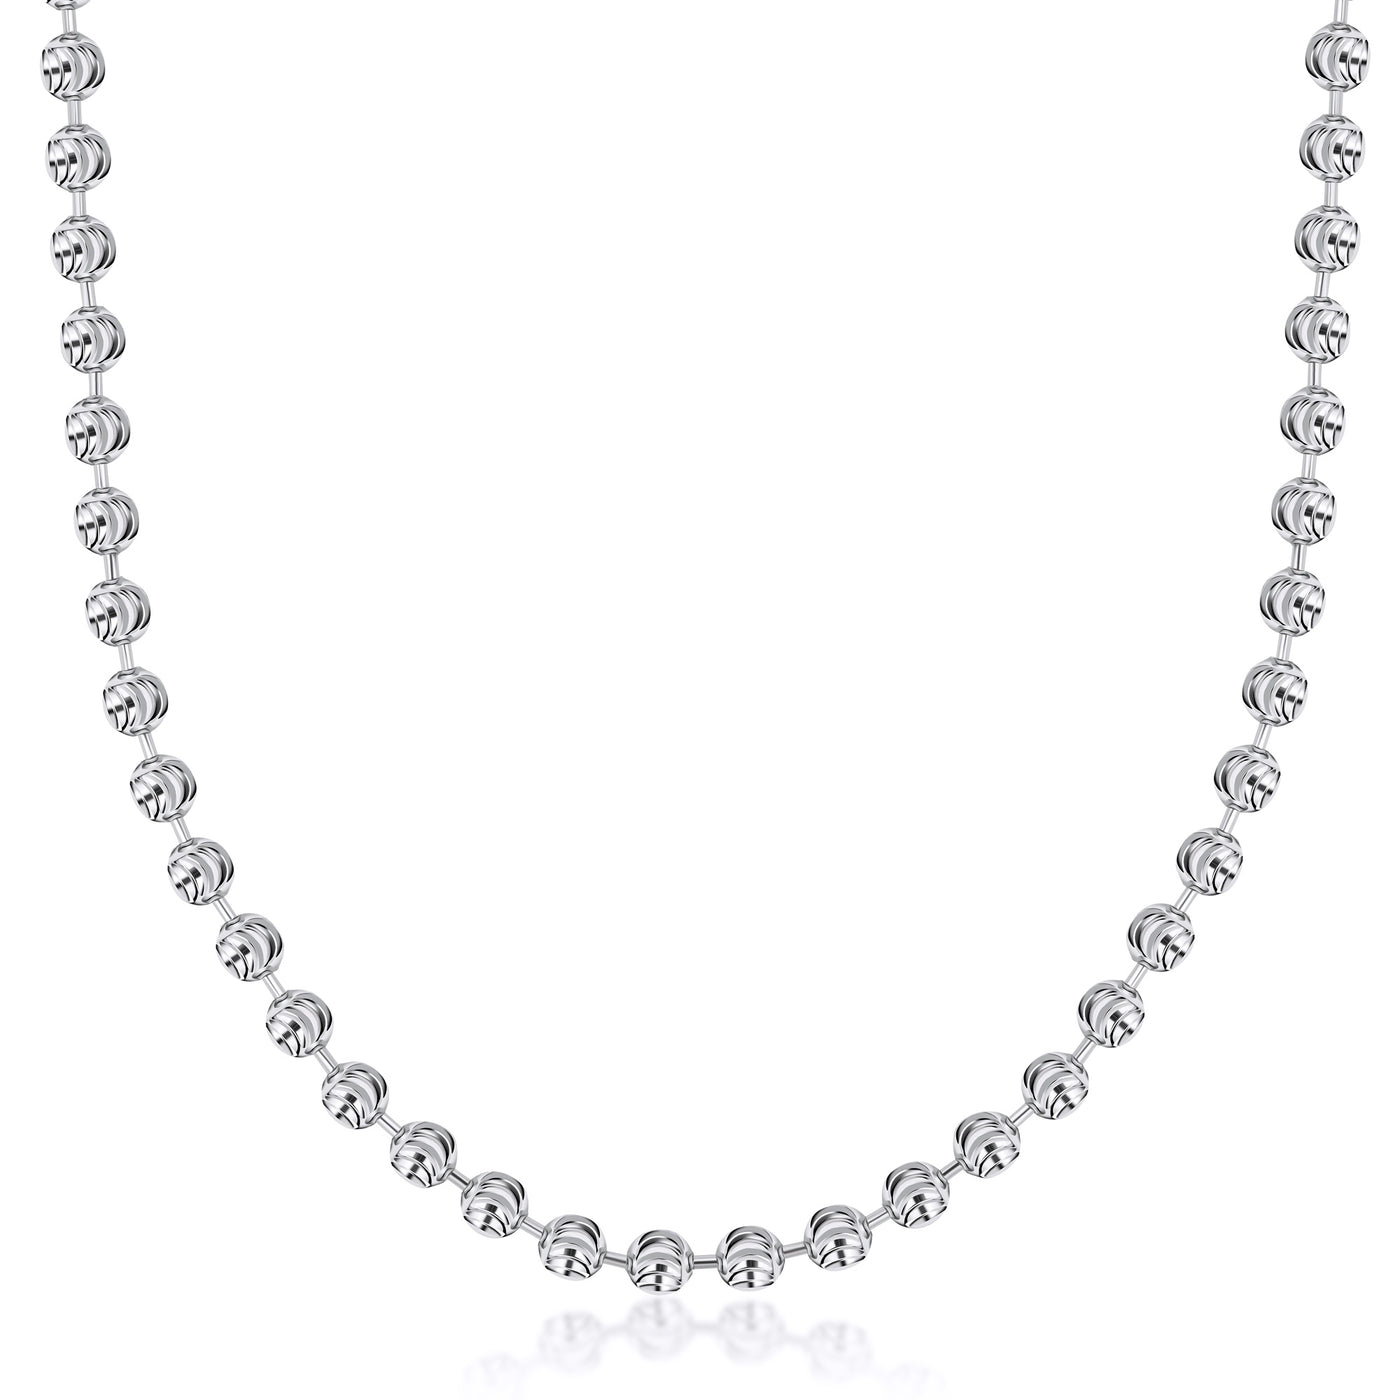 Silver 5MM Moon Cut Bead Chain Necklaces